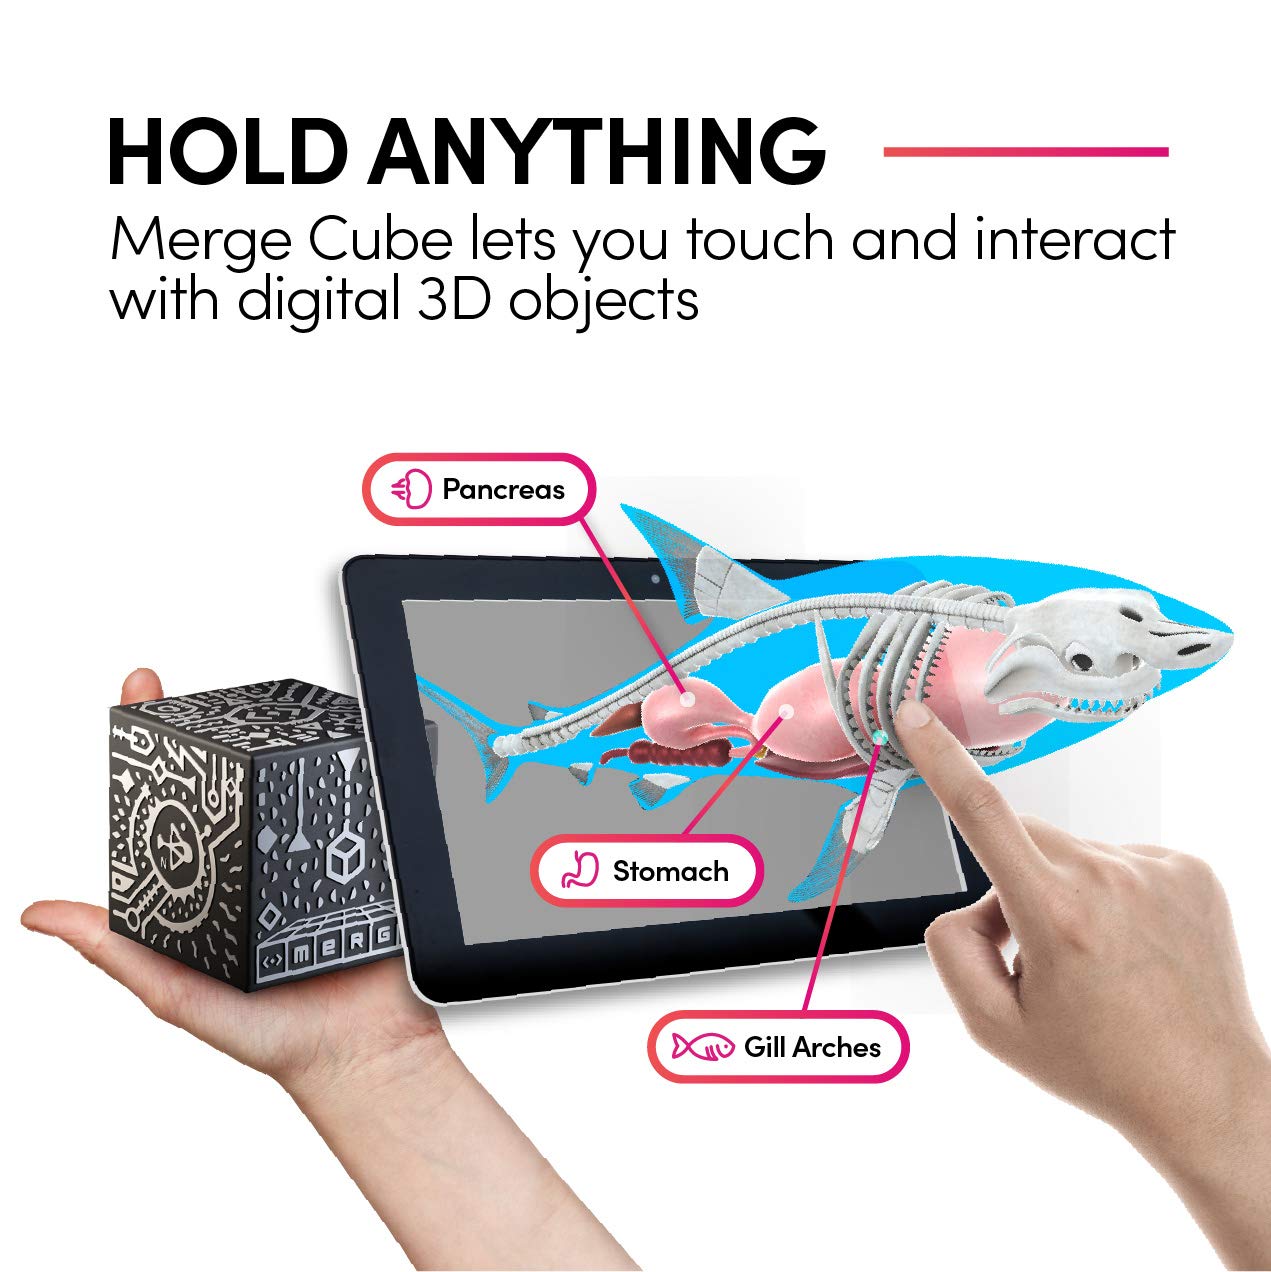 Merge Cube - Hold Holograms in Your Hand with Award Winning AR Toy for Kids - iOS or Android Phone or Tablet Brings the Cube to Life, Free Games With Every Purchase, Works with Merge VR/AR Goggles